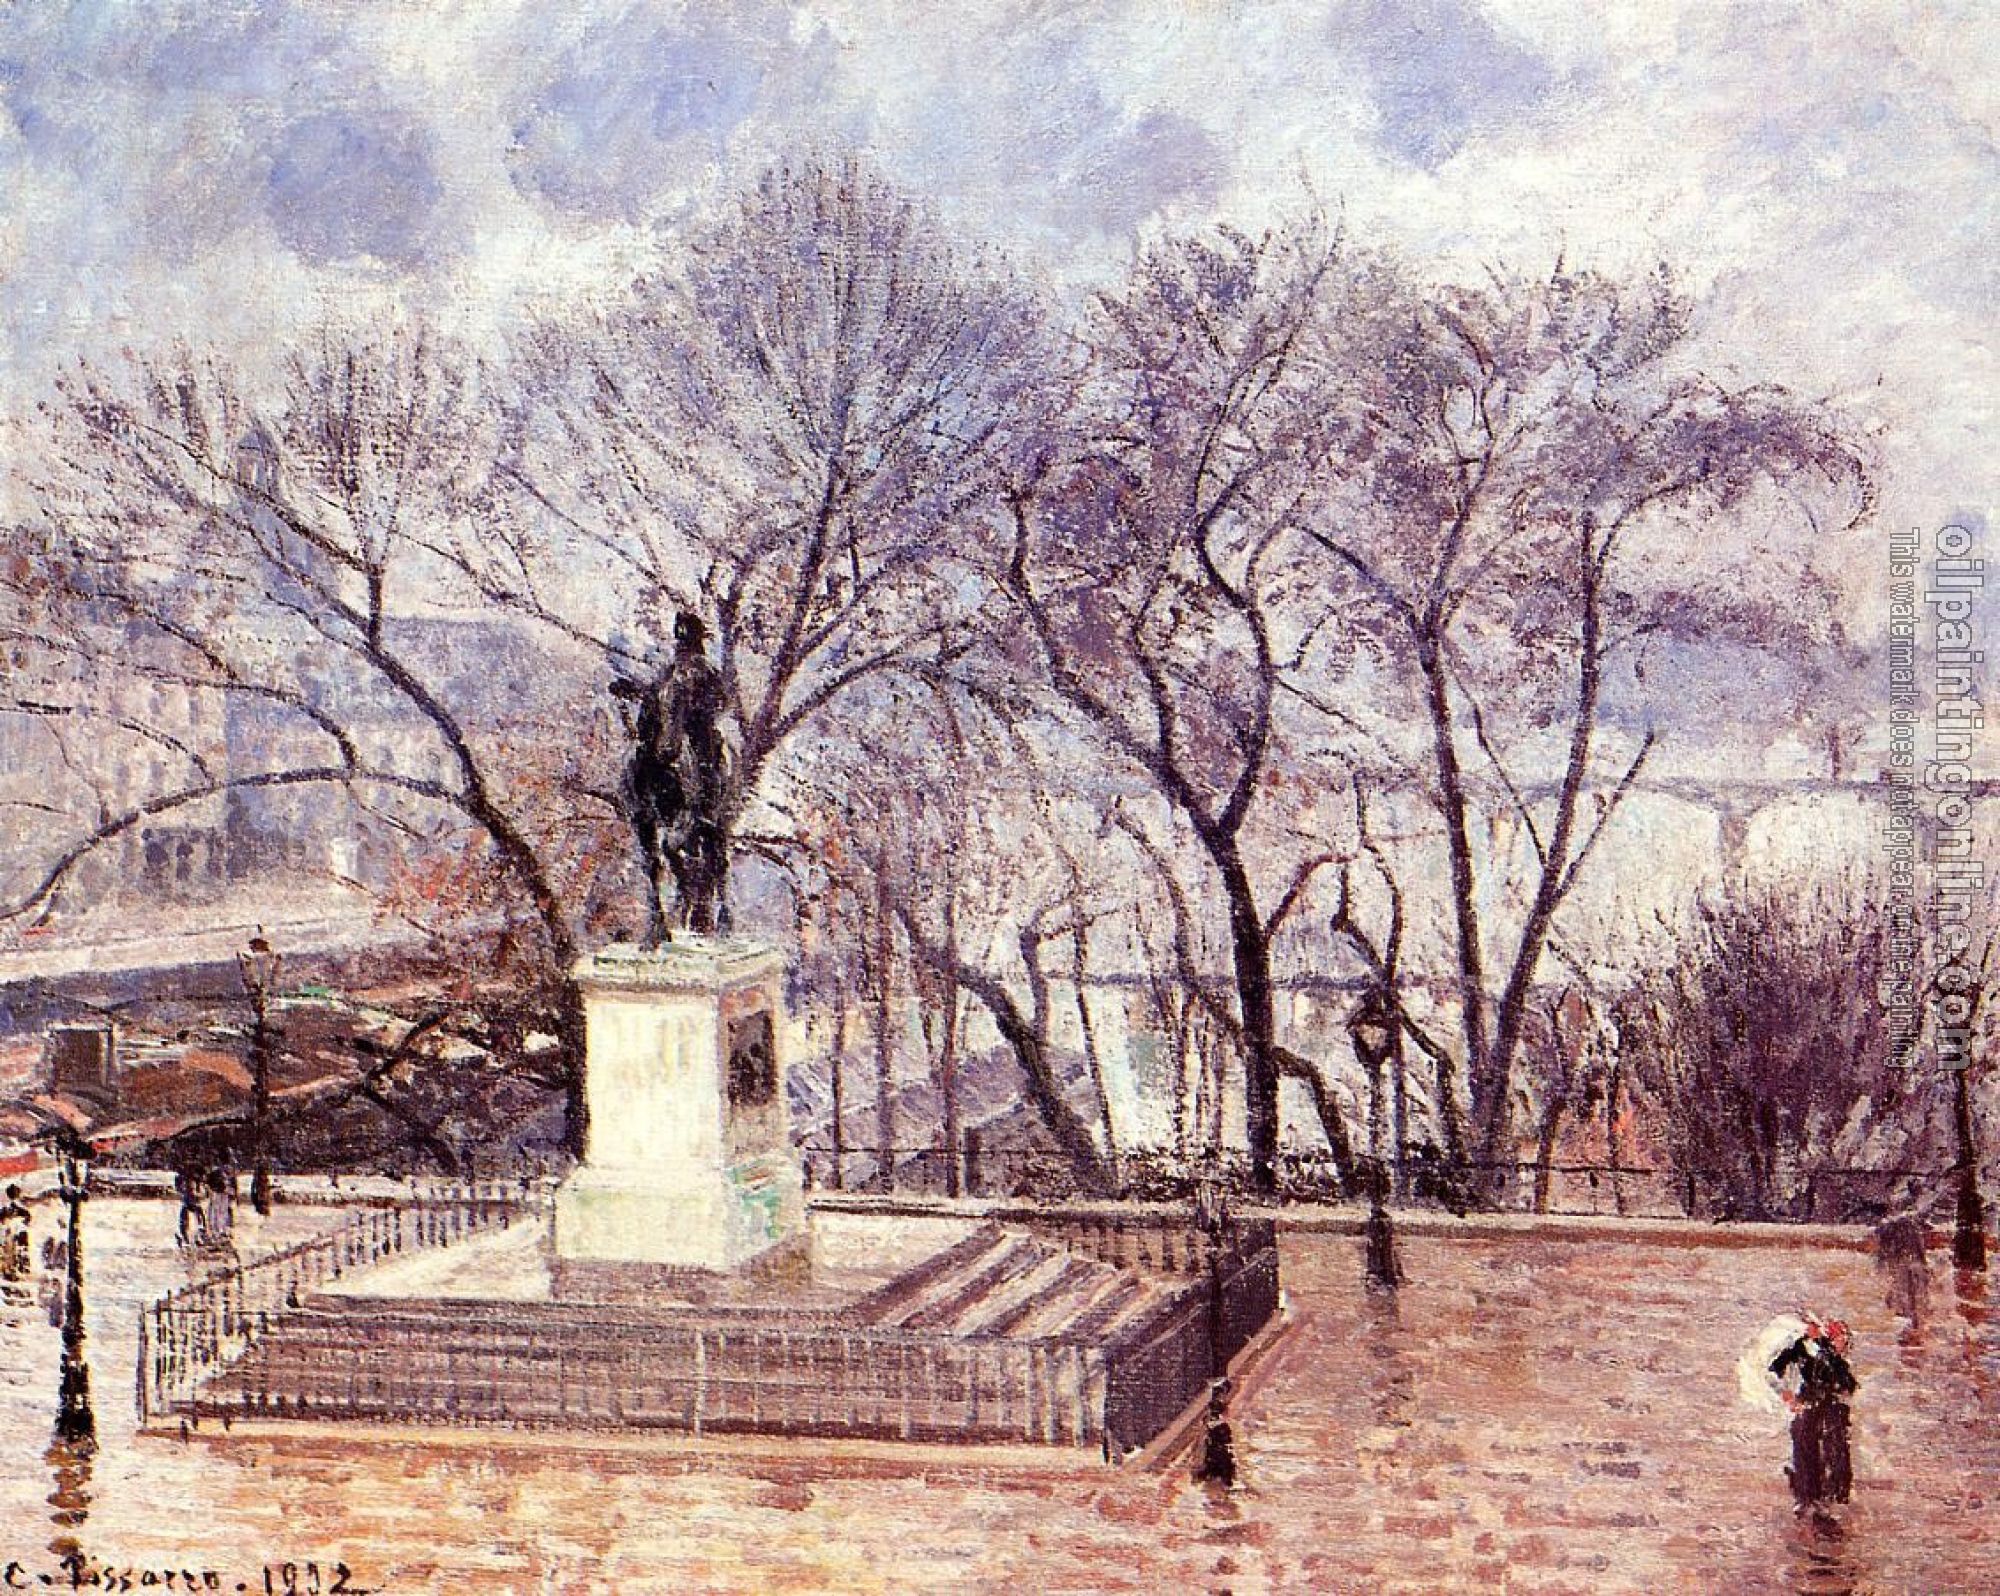 Pissarro, Camille - Pont-Neuf, the Statue of Henri IV, Afternoon, Rain